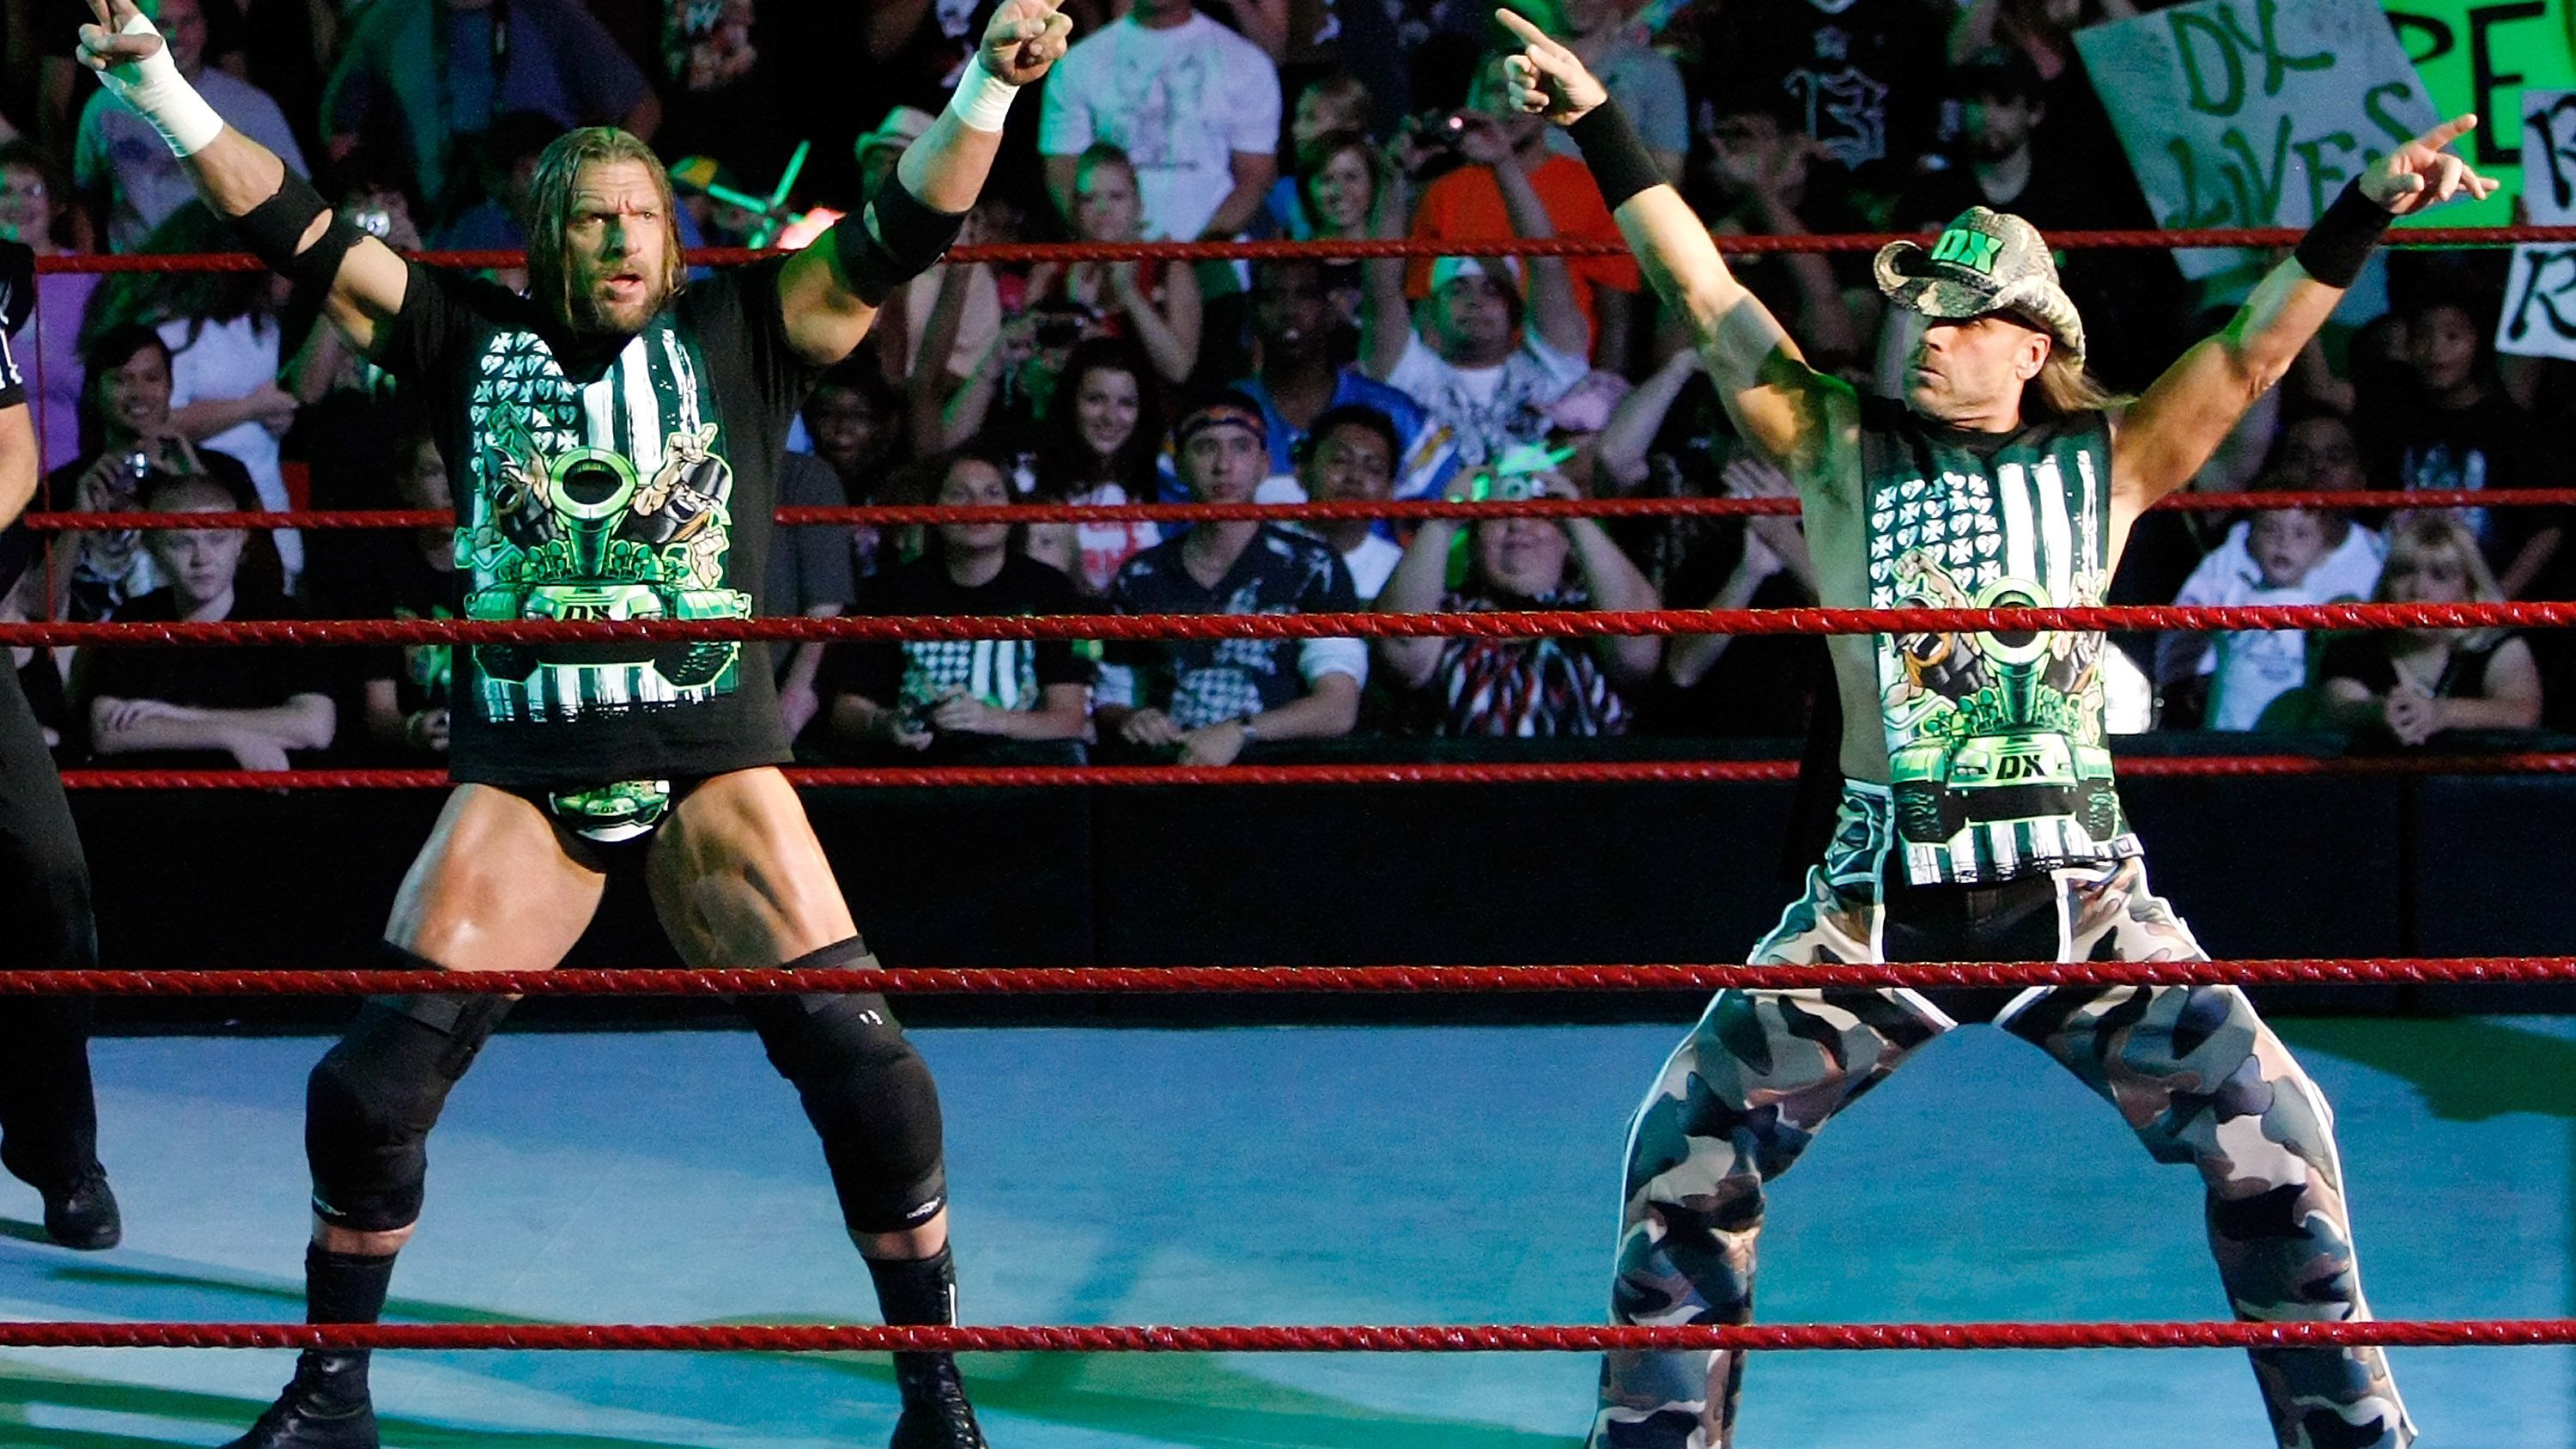 DX with Triple H and Shawn Michaels